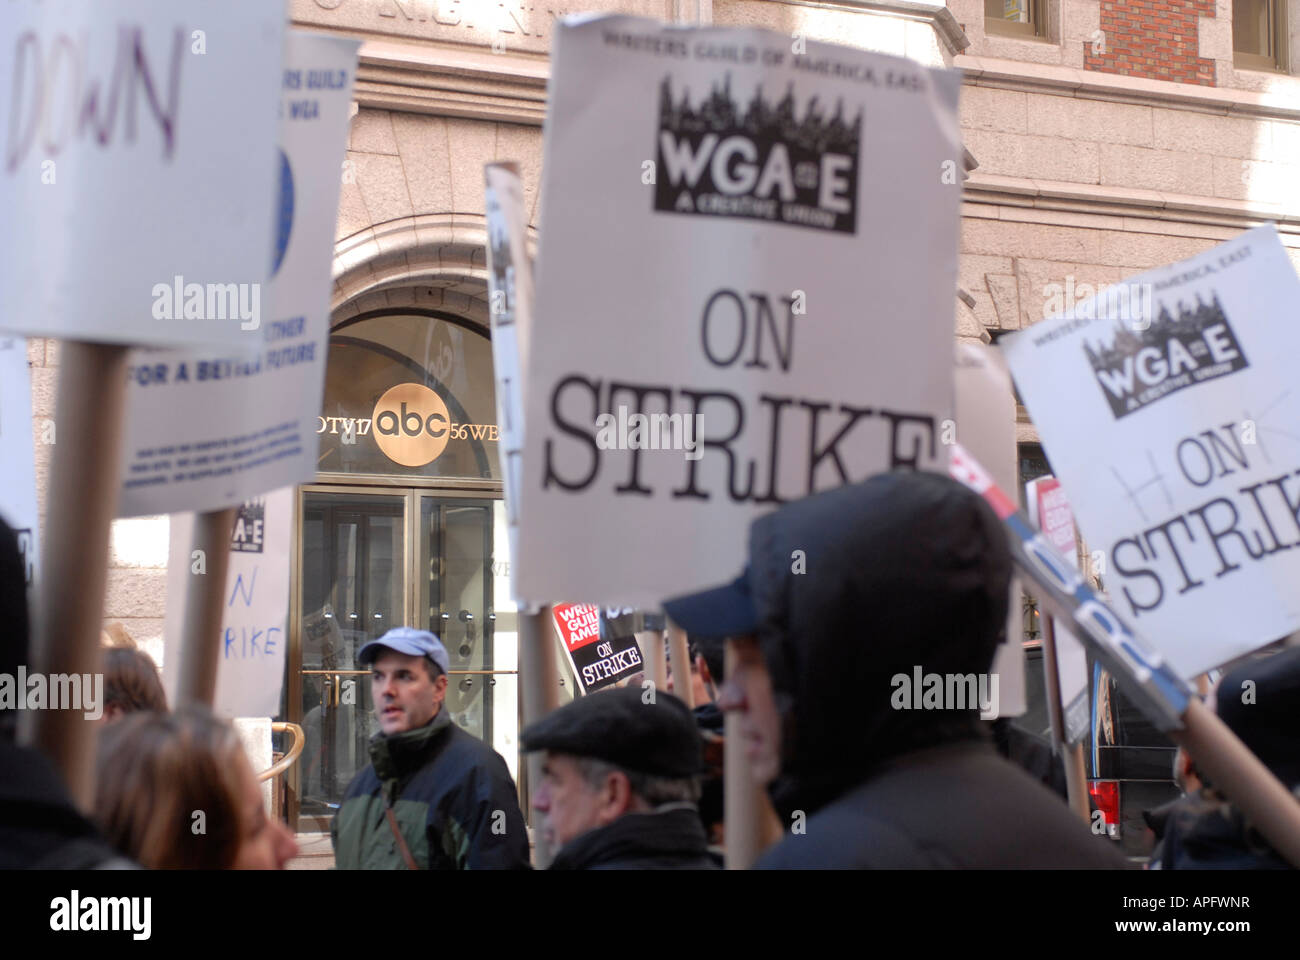 Members of the Writers Guild of America East picket outside ABC headquarters on the Upper West Side of NYC Stock Photo